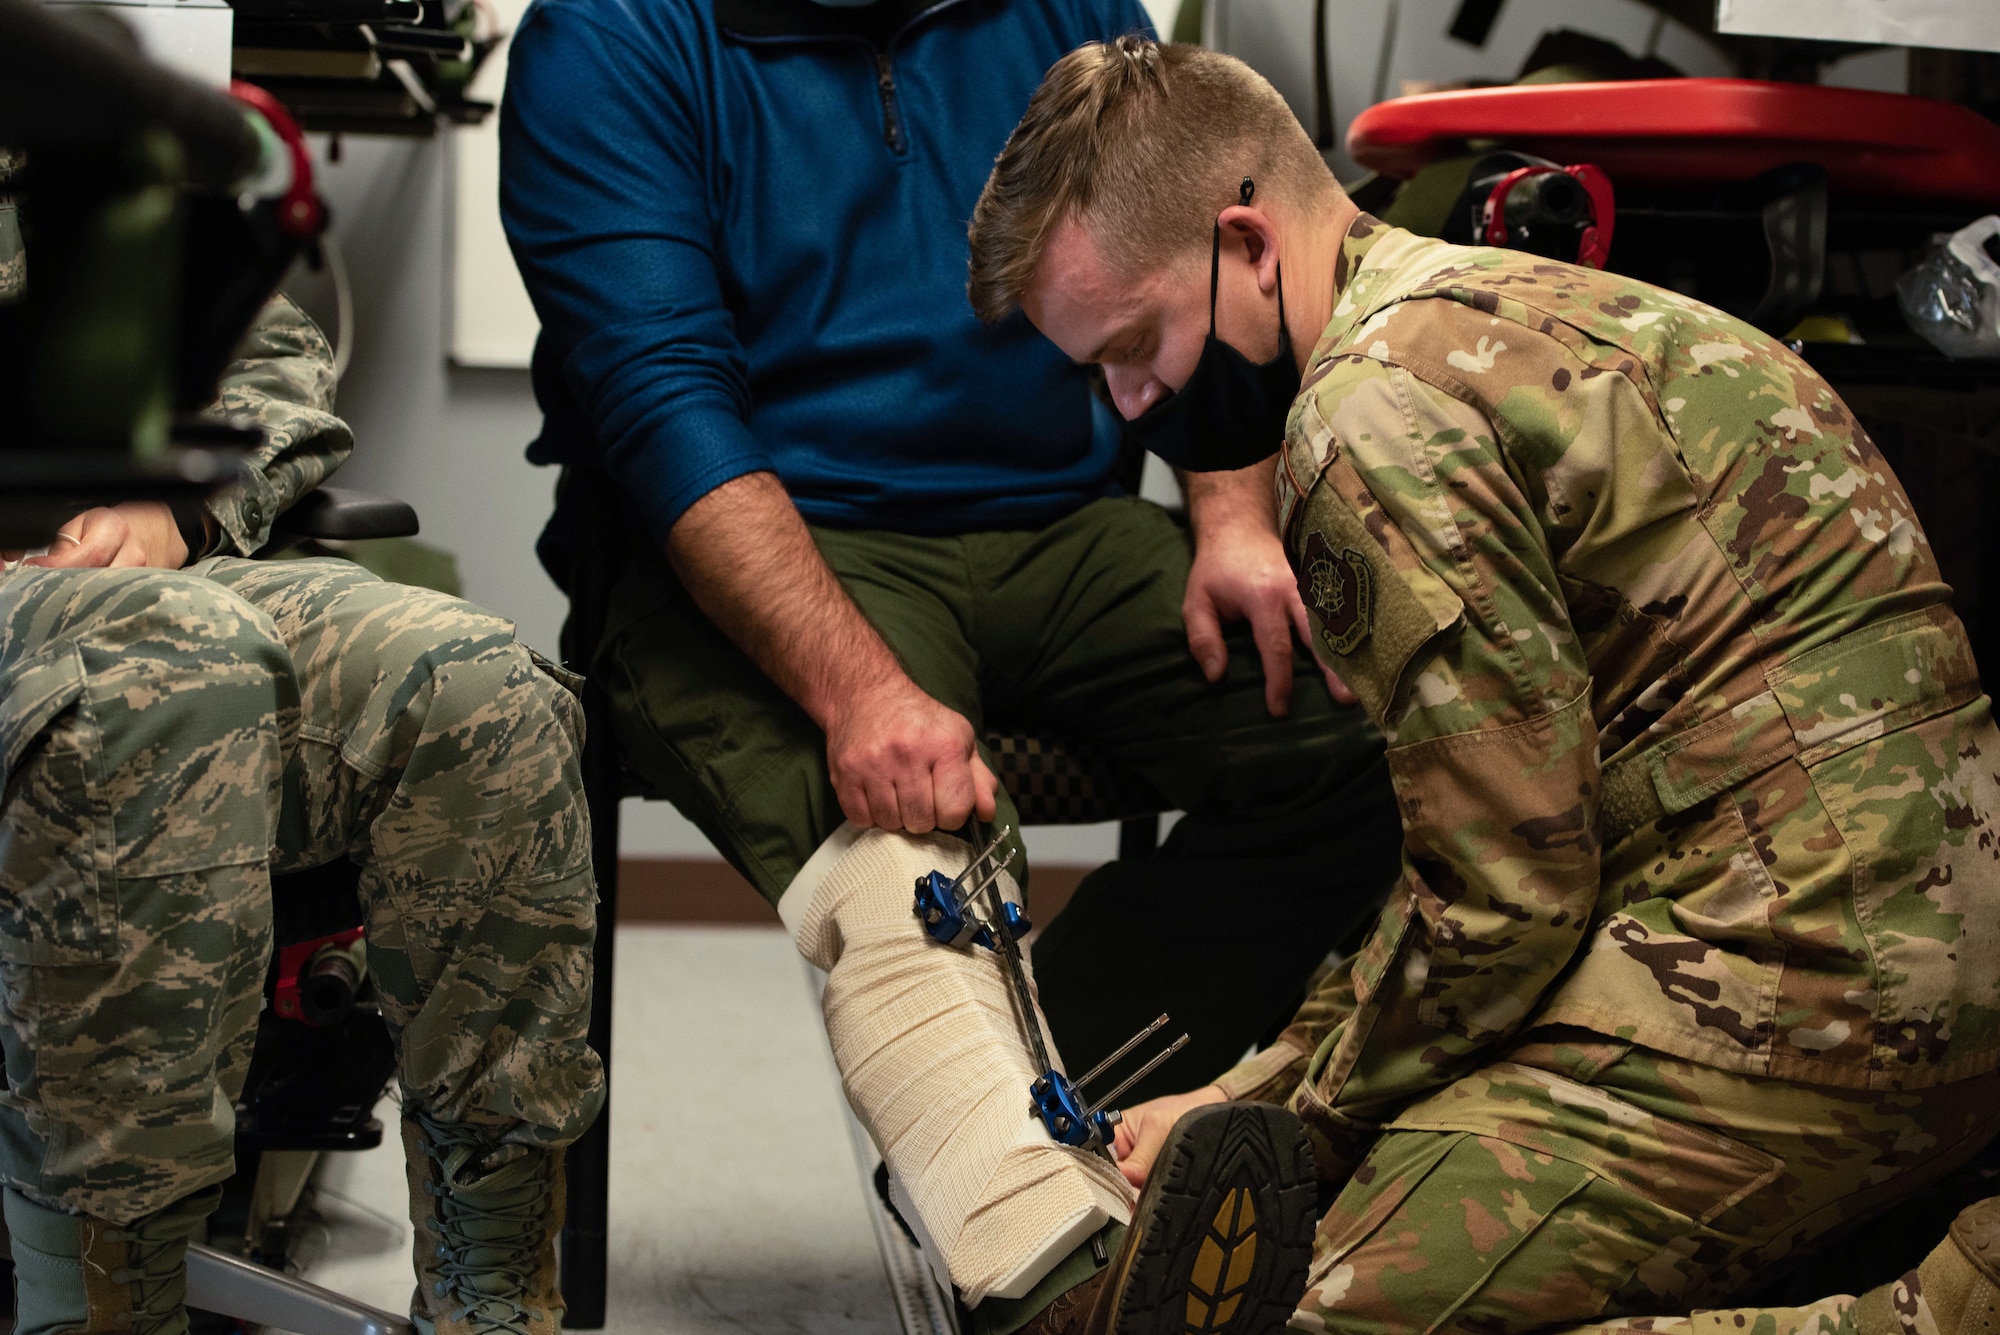 U.S. Air Force Capt. John Ininns, 375th Aeromedical Evacuation Squadron clinical nurse, wraps badges around a simulated patient’s leg on Scott AFB, Illinois, Nov. 3, 2021. This was part of a training exercise to simulate serious injuries to prepare Airmen from the 375th AES for real-world evacuation scenarios. (U.S. Air Force photo by Airman 1st Class Mark Sulaica)